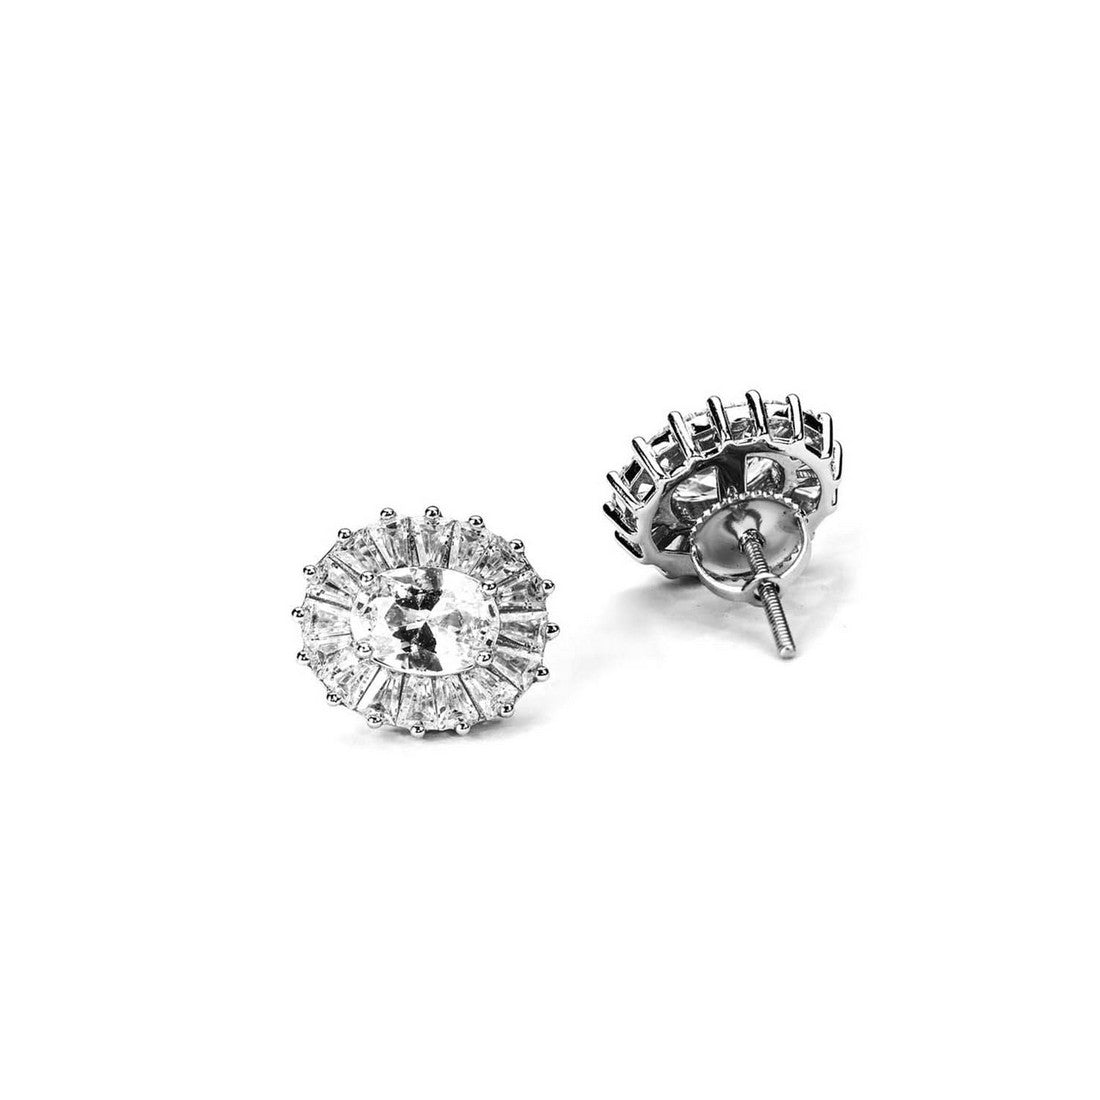 The Morning Glory Stud 925 Silver Earrings